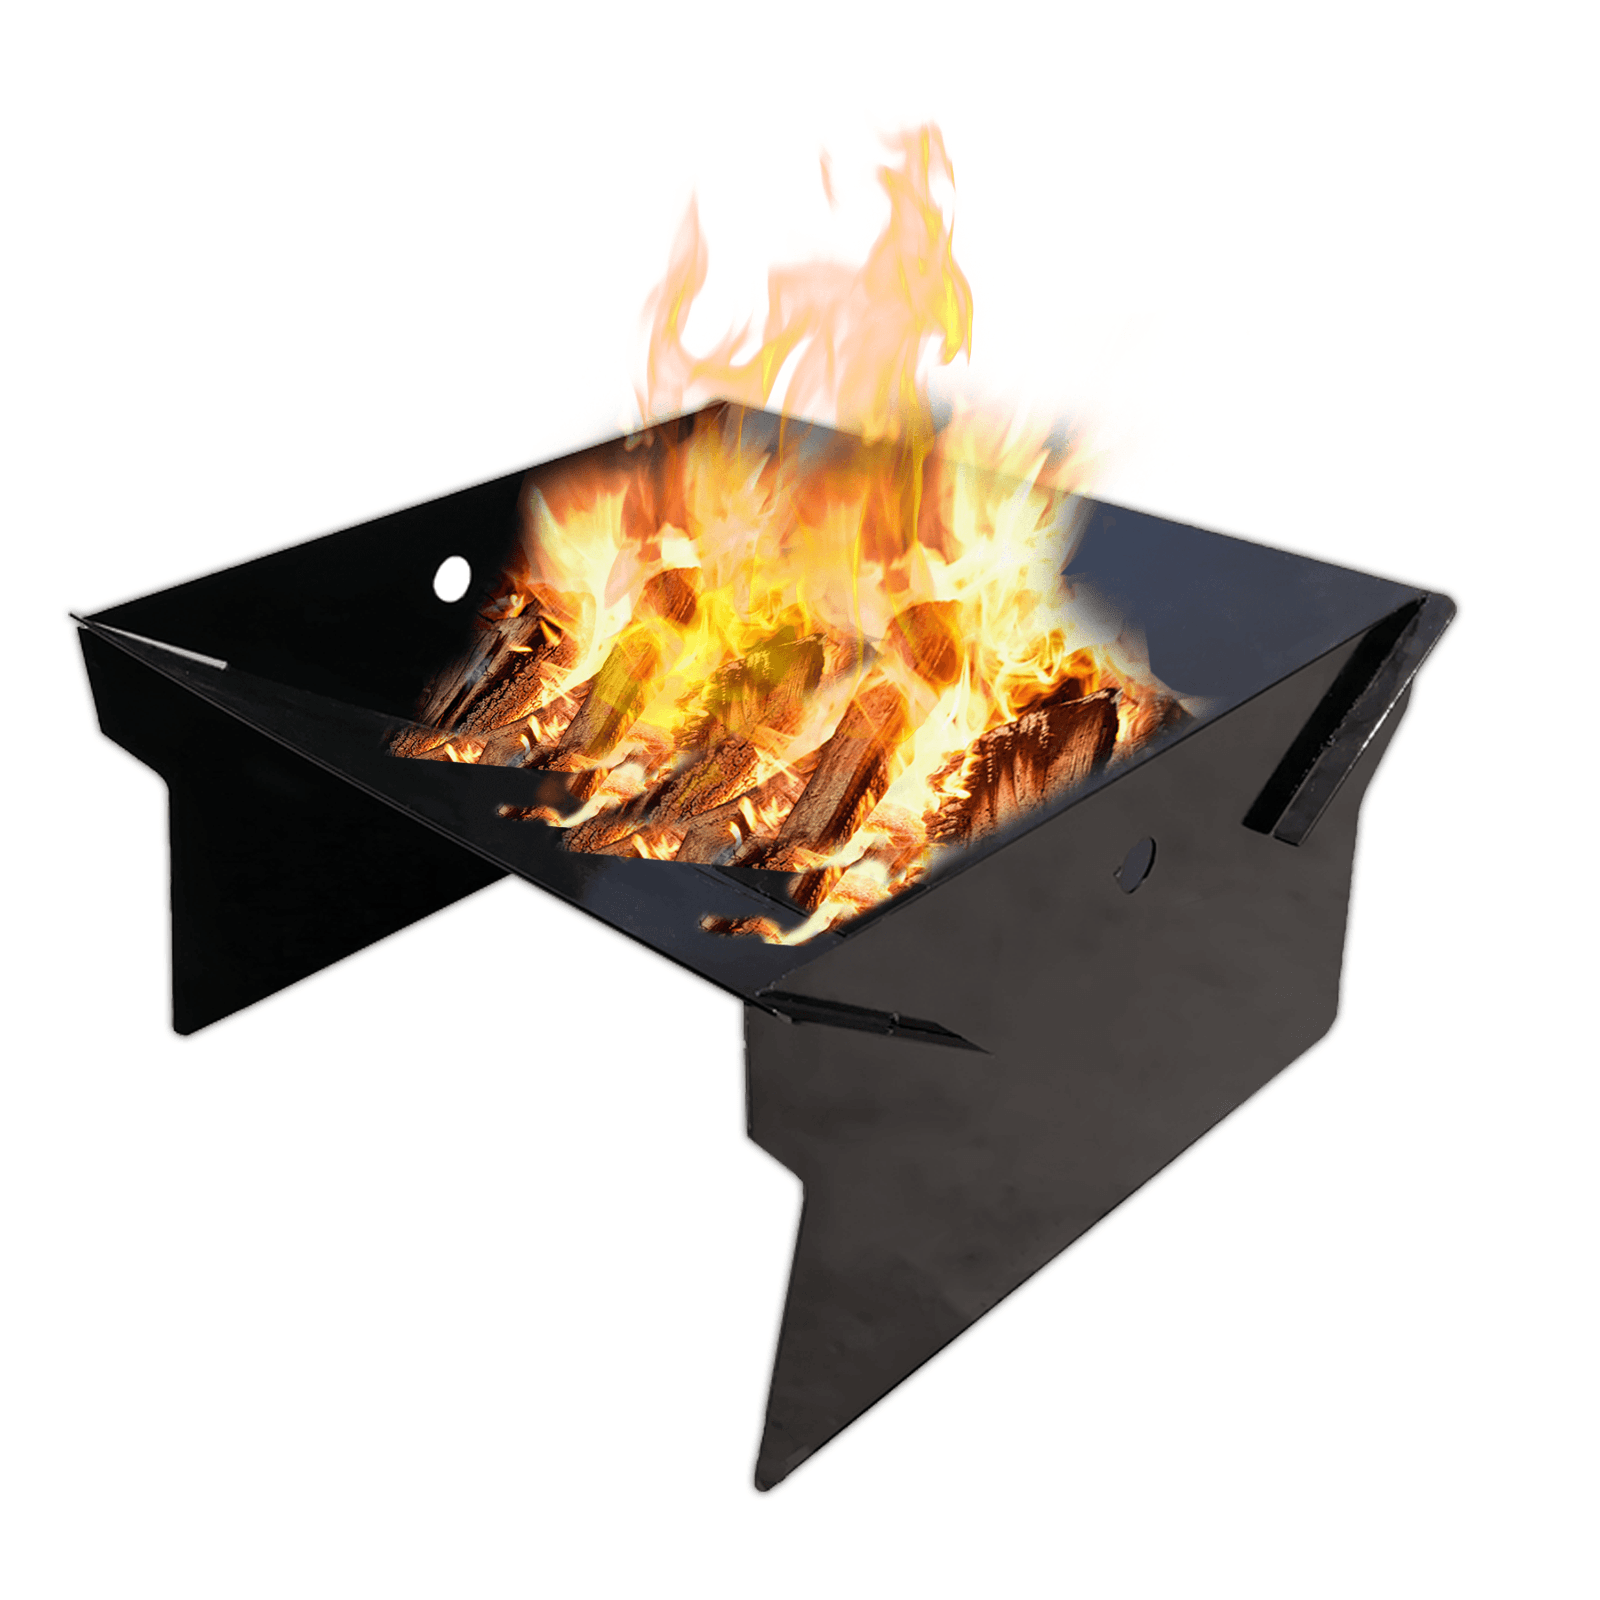 Portable Outdoor Camping Wood Burning Fire Pit - Merchandise Plug